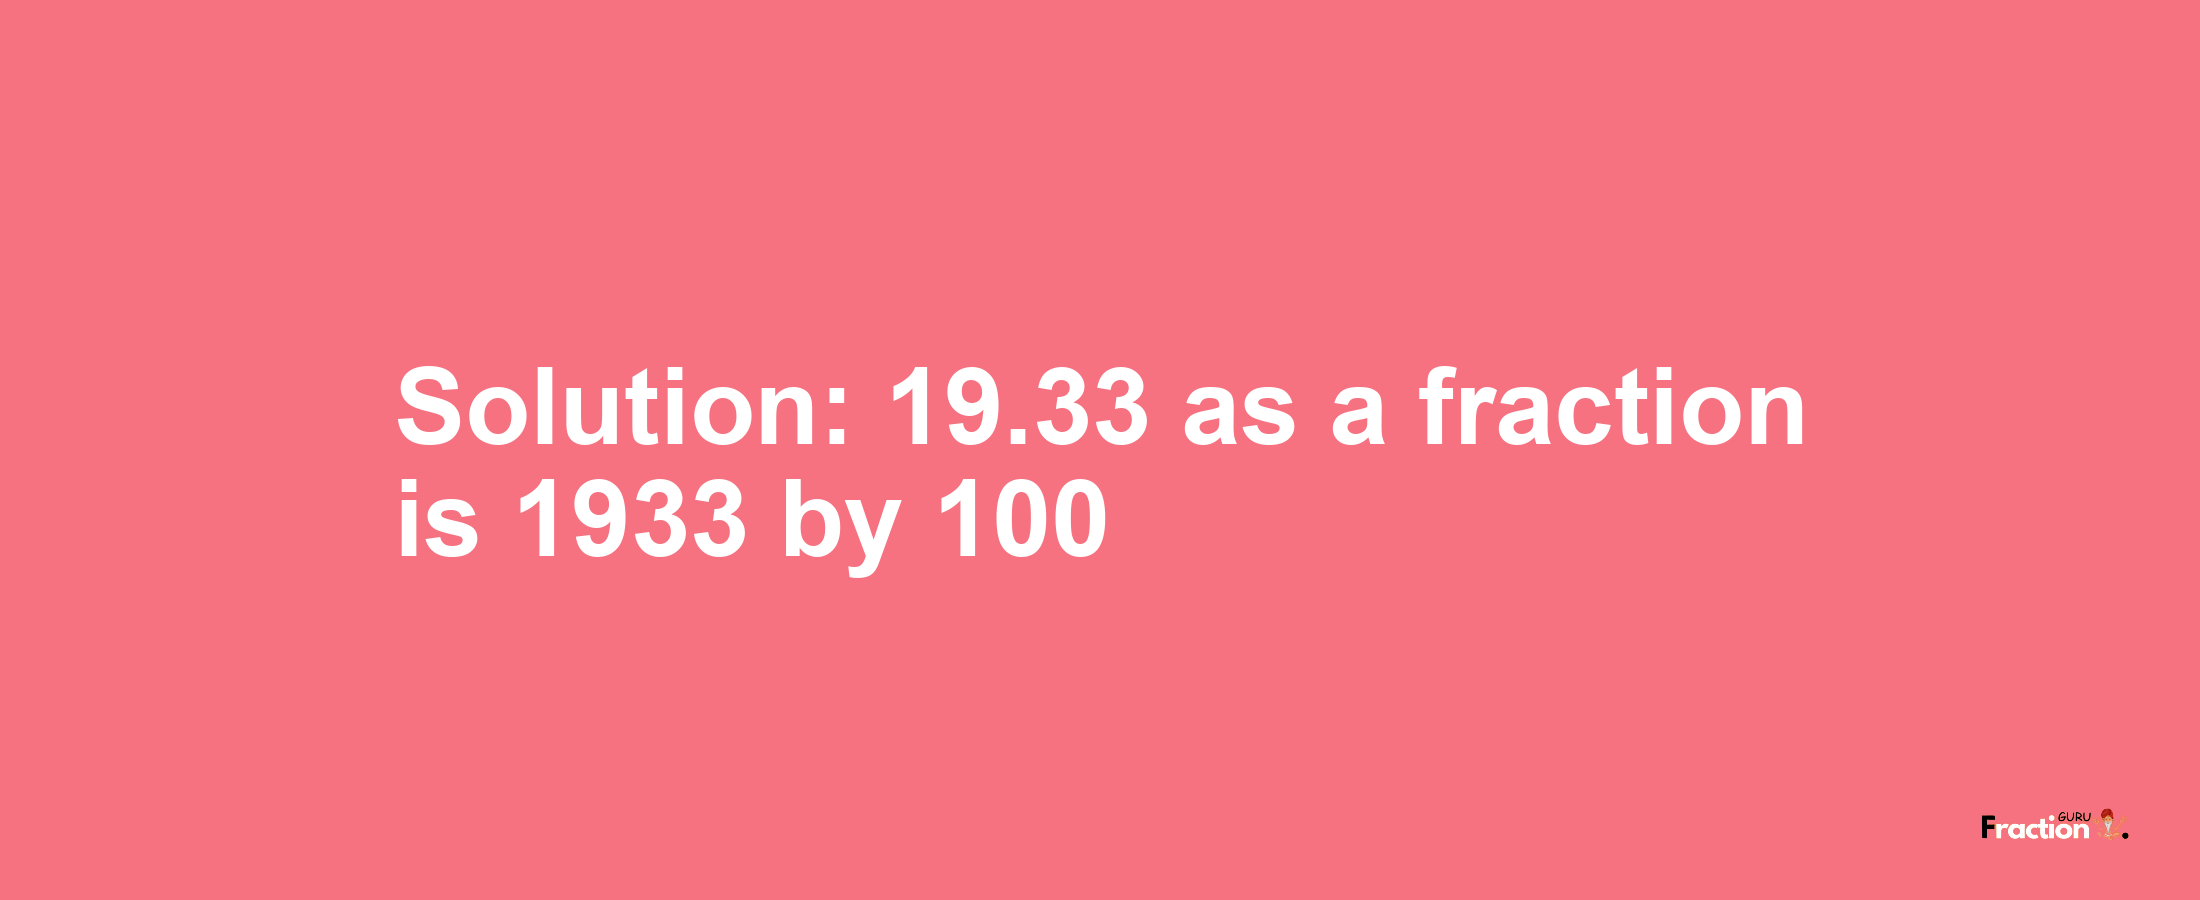 Solution:19.33 as a fraction is 1933/100